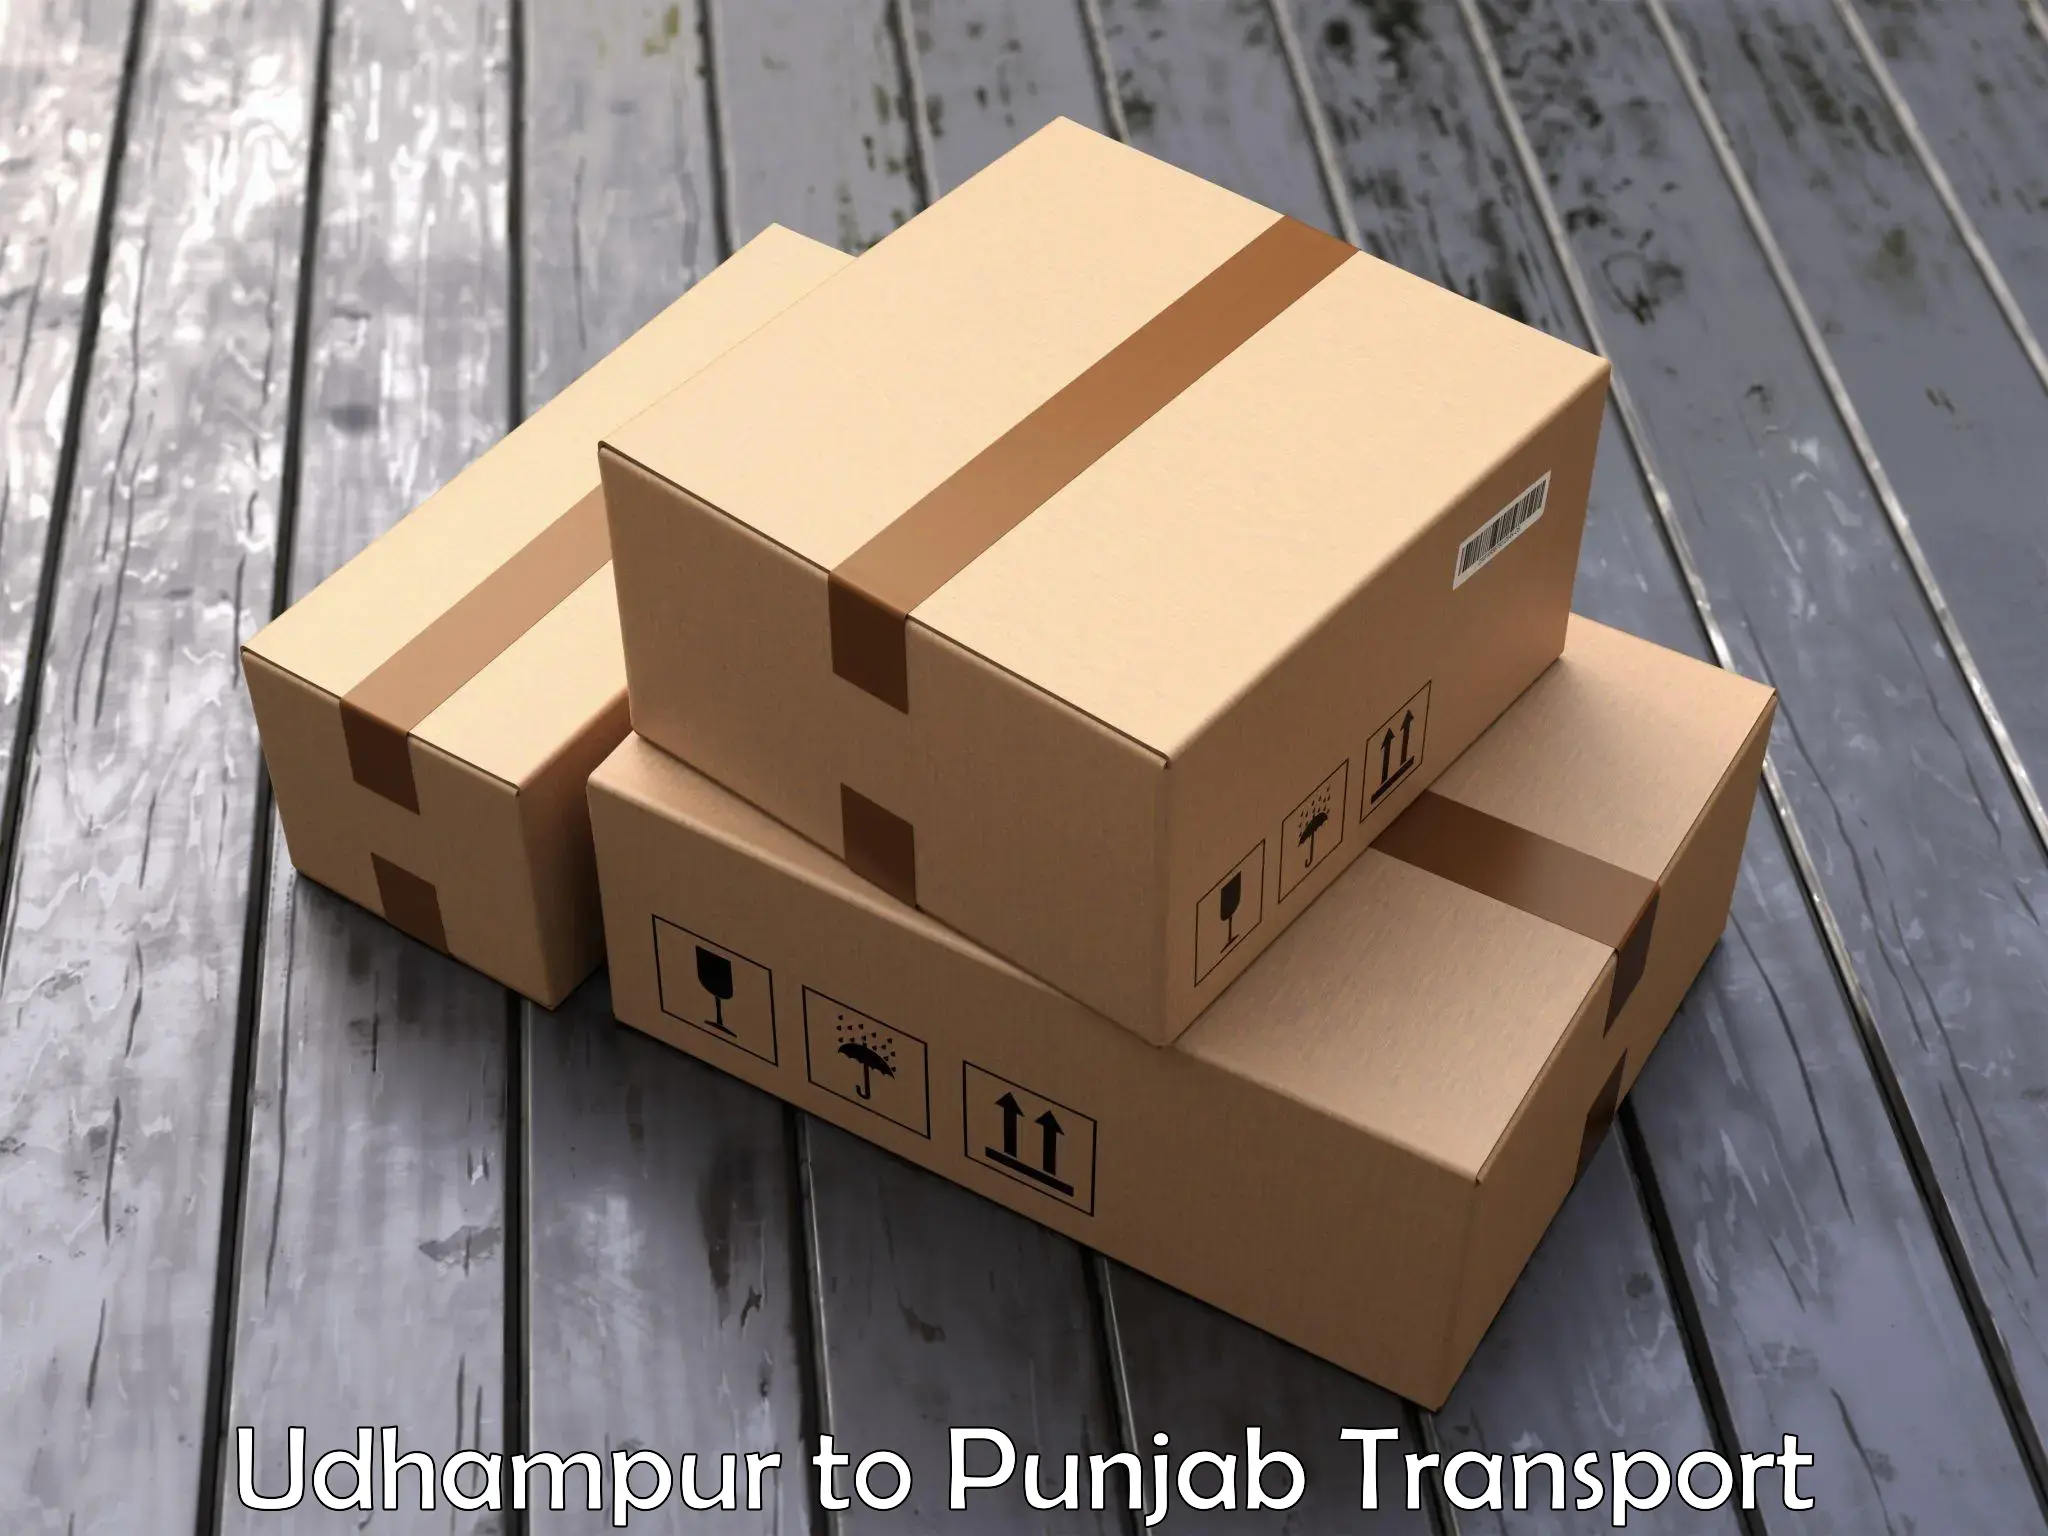 Truck transport companies in India Udhampur to Ludhiana